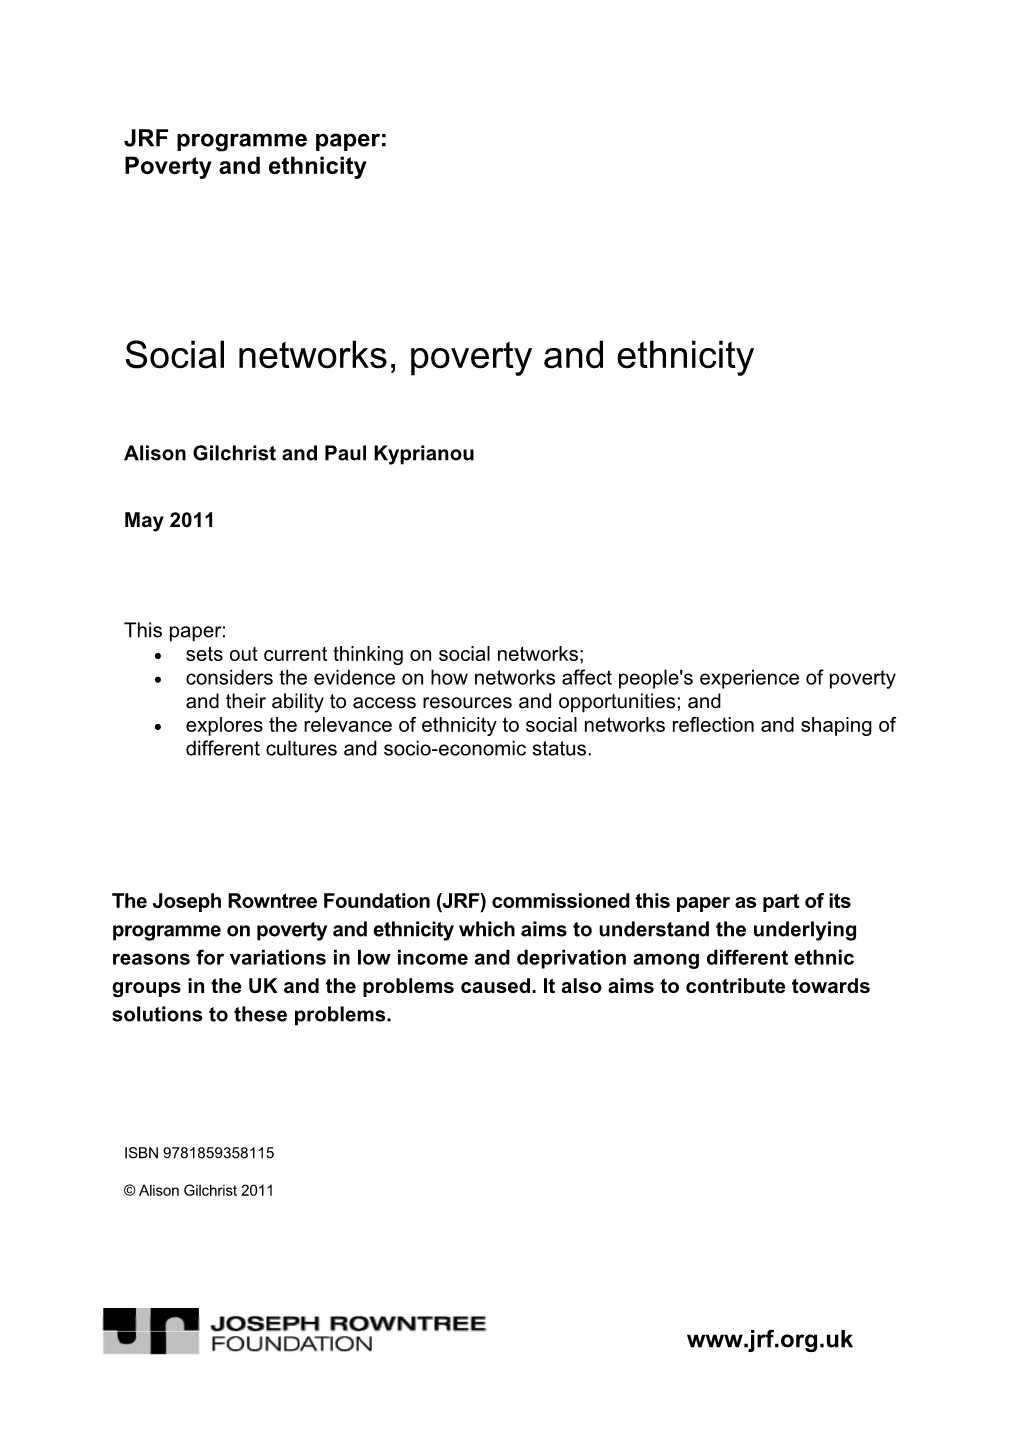 Social Networks, Poverty and Ethnicity